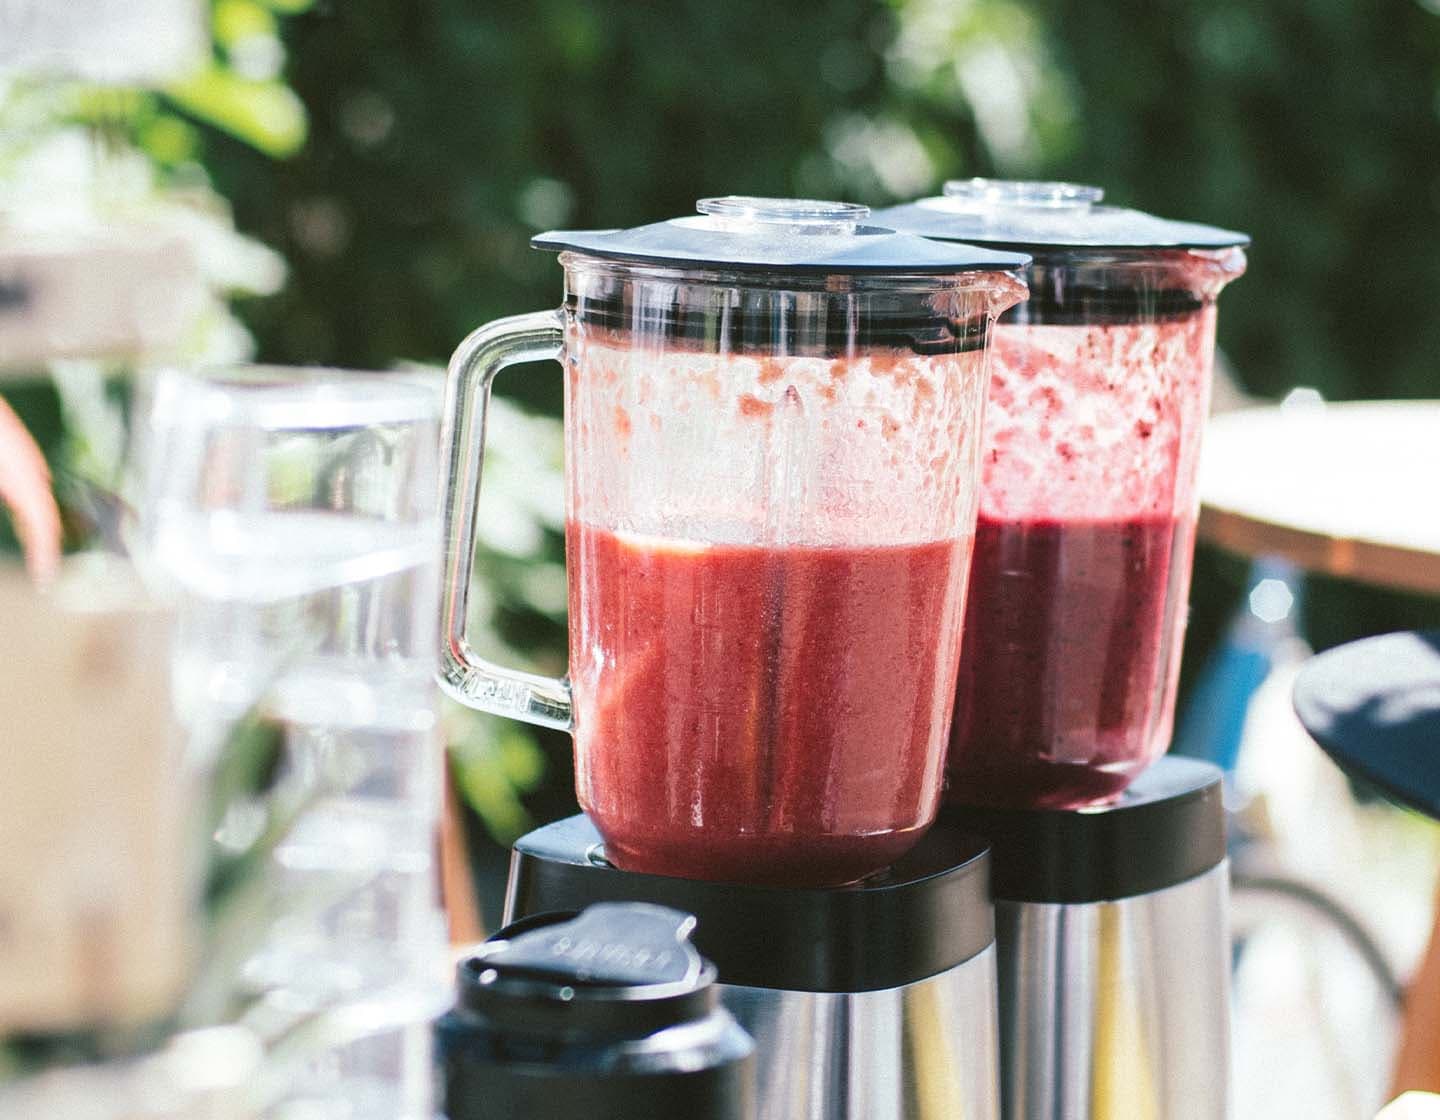 Two blenders filled with red liquid 